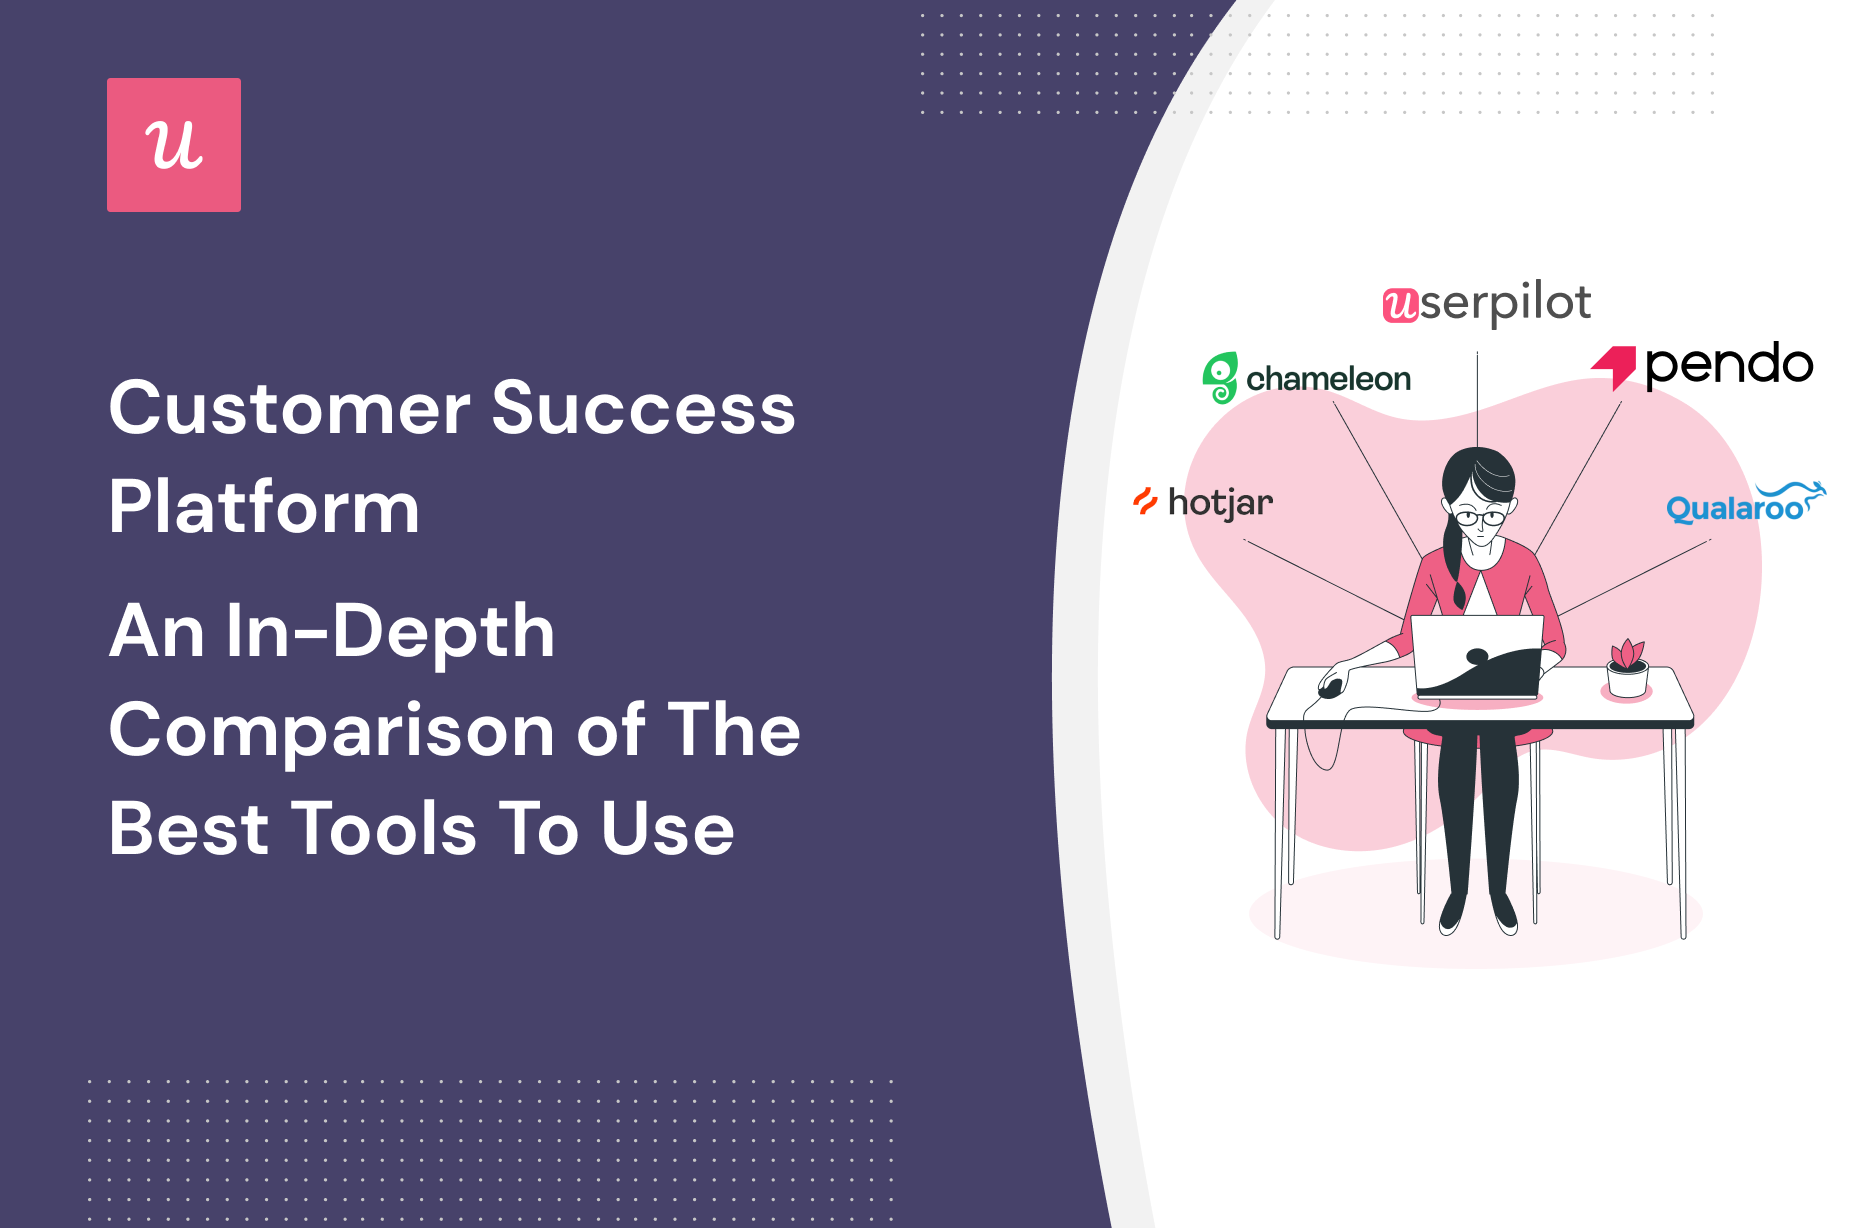 Customer Success Platform An In-Depth Comparison of The Best Tools To Use